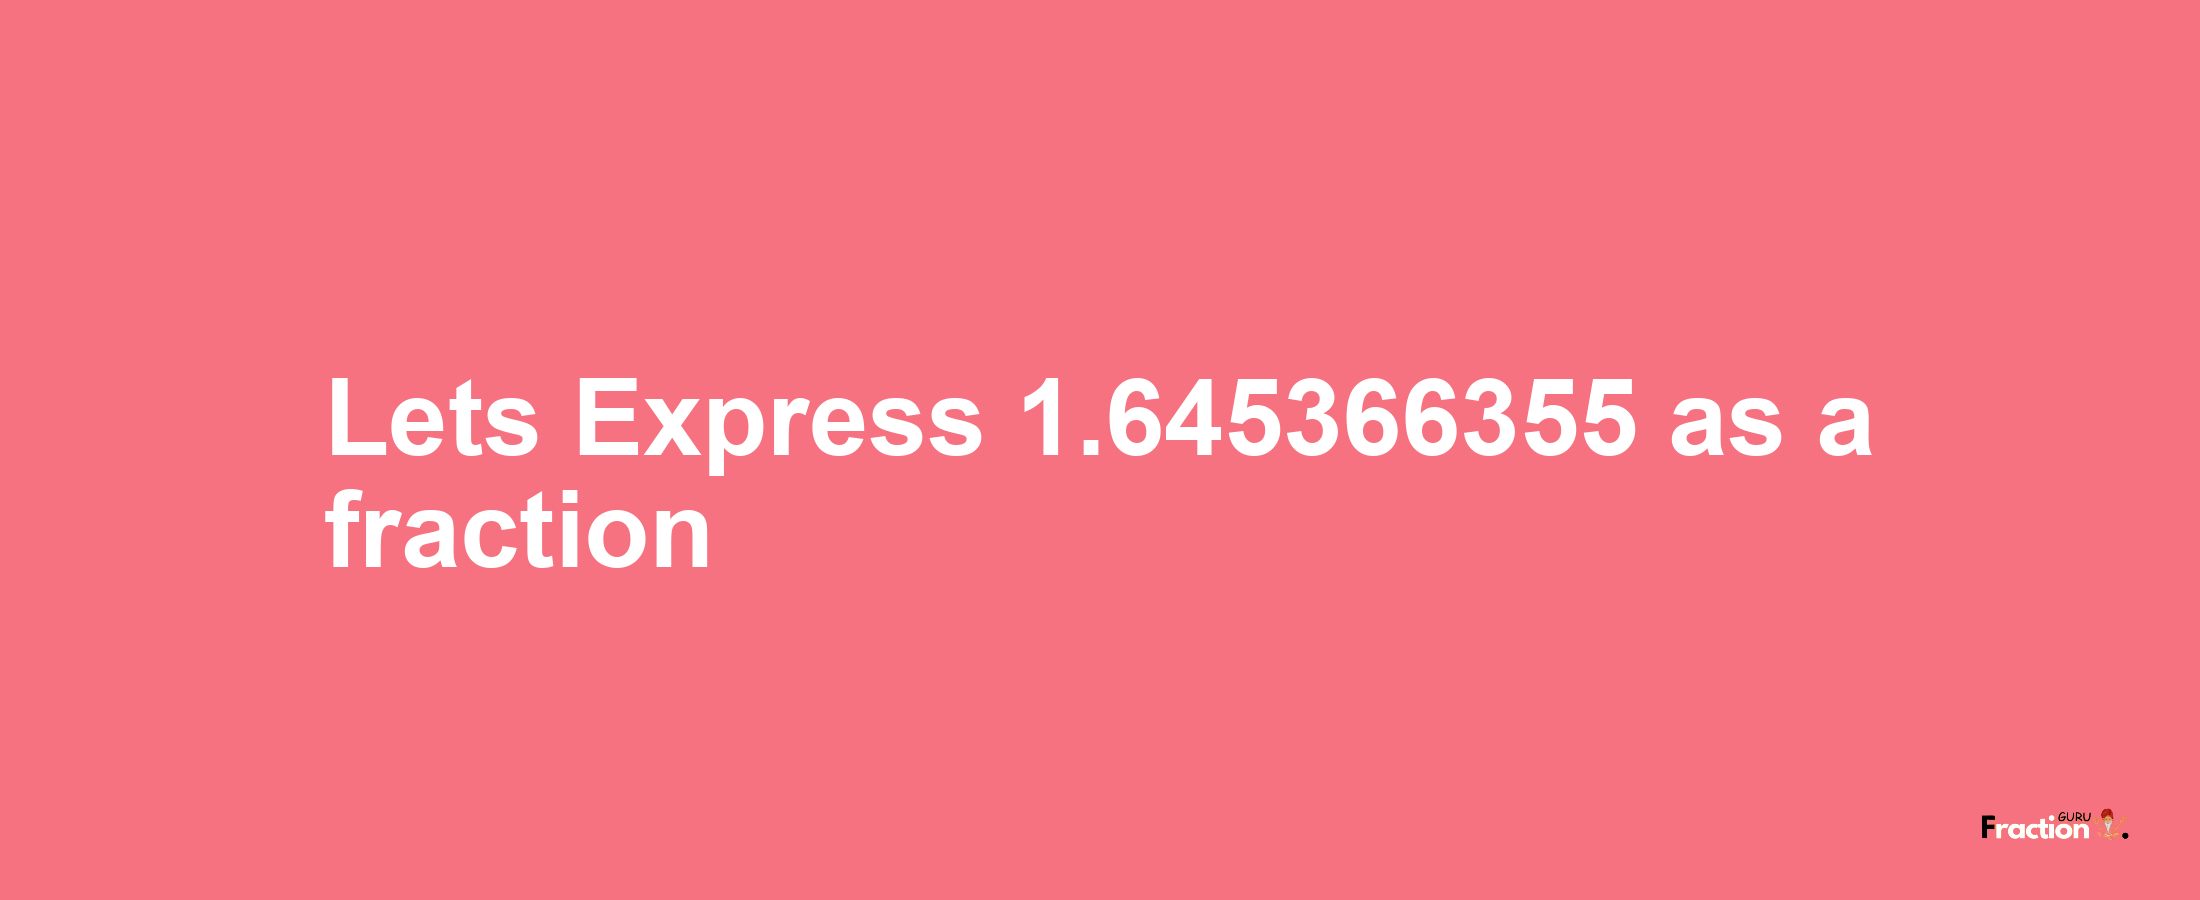 Lets Express 1.645366355 as afraction